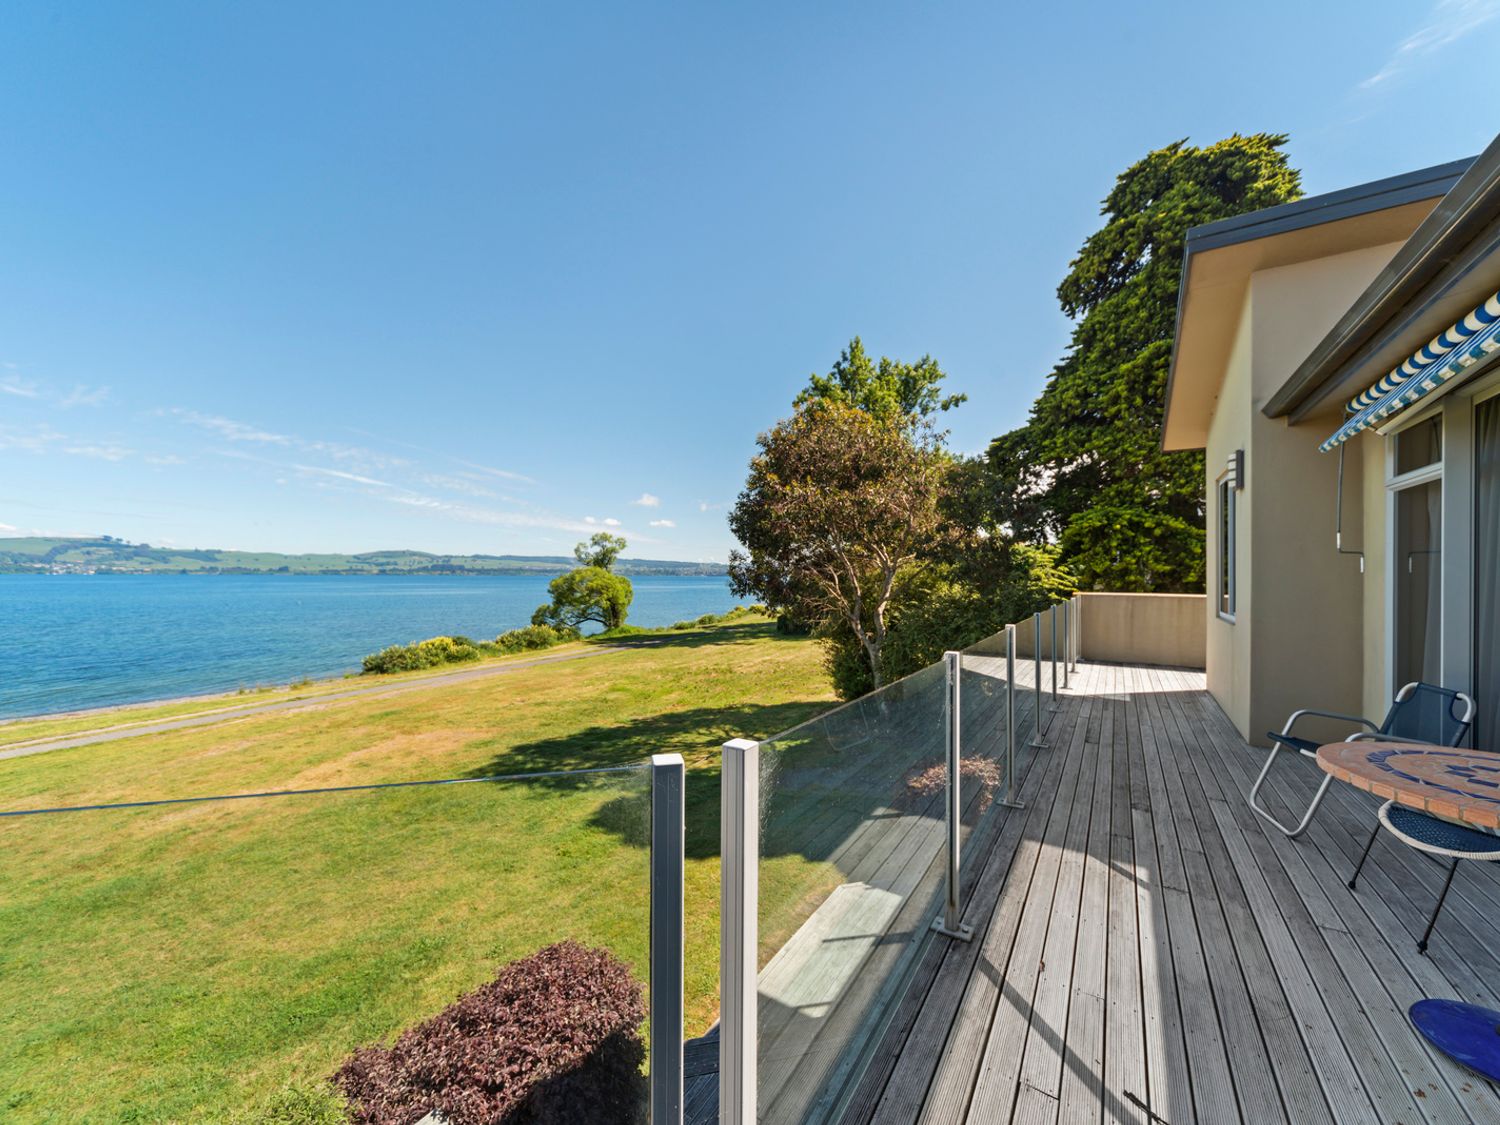 Lakeside Vistas Magic - Rainbow Point Holiday Home on the Waterfront -  - 1029507 - photo 1